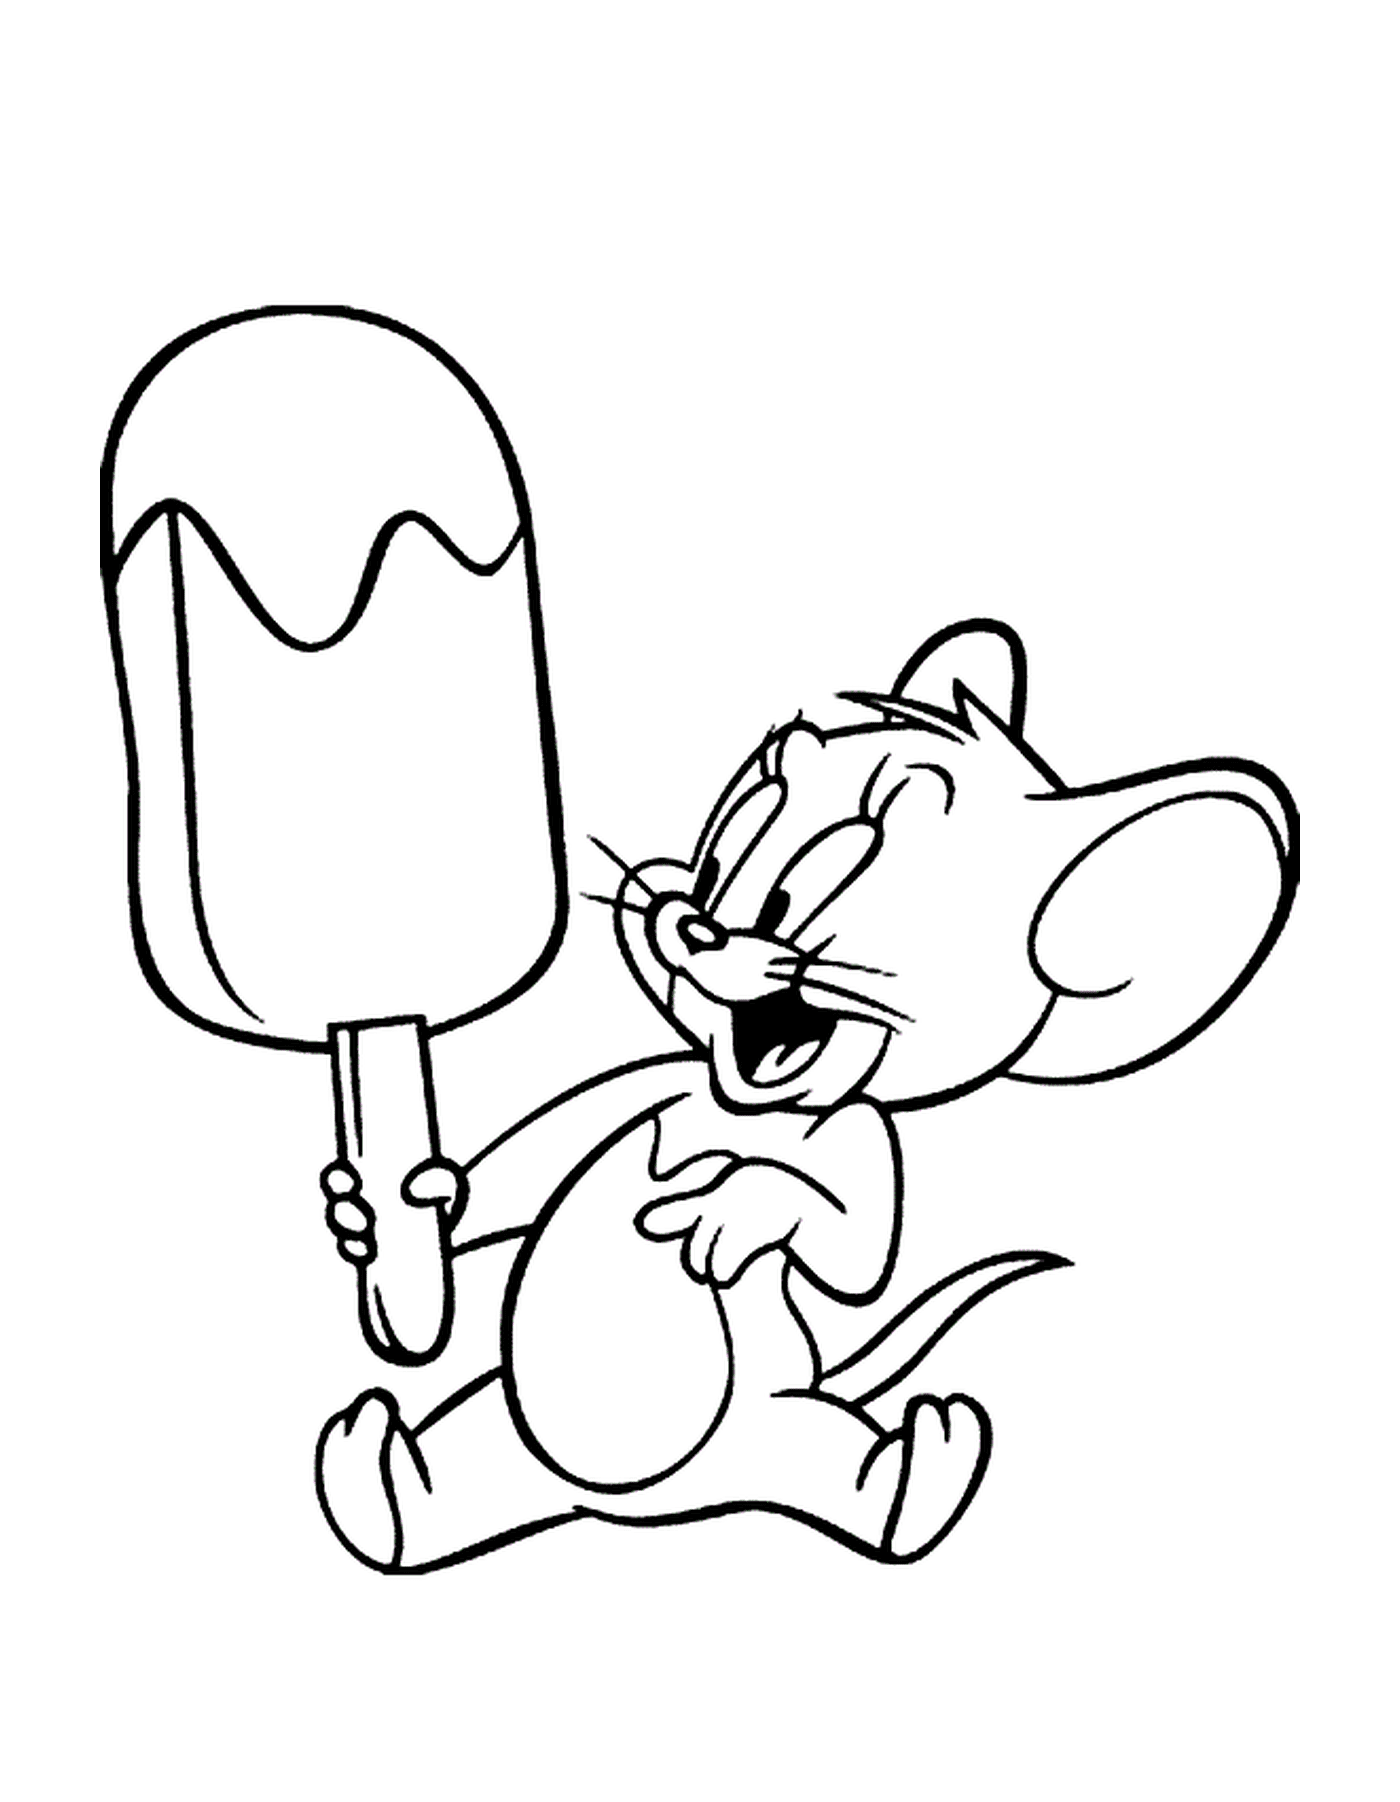  A mouse holding an ice cream 